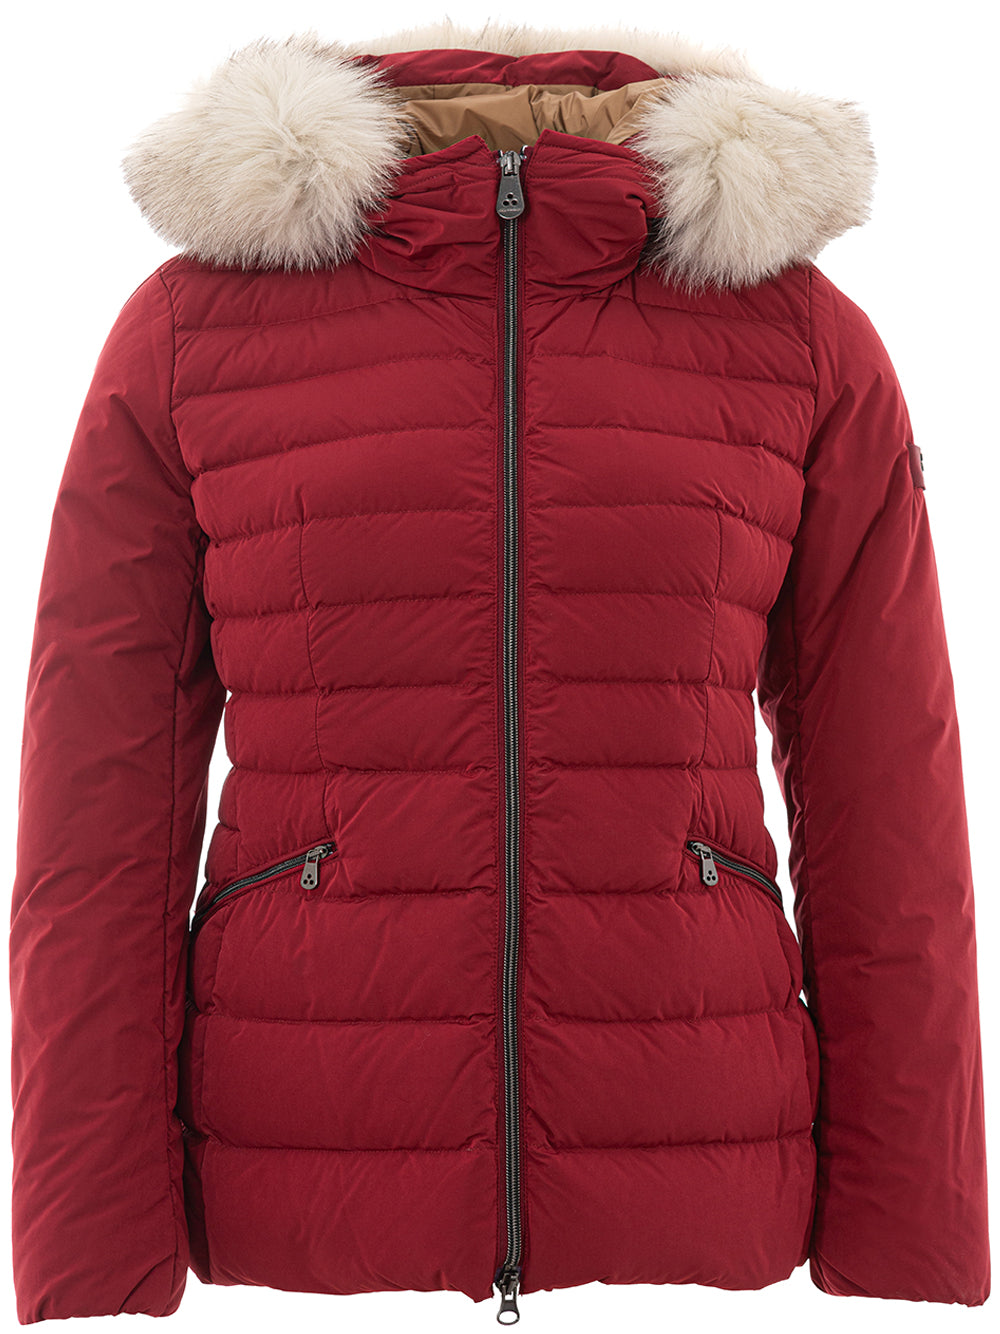 Bordeaux Padded Jacket with Fur Collar Peuterey